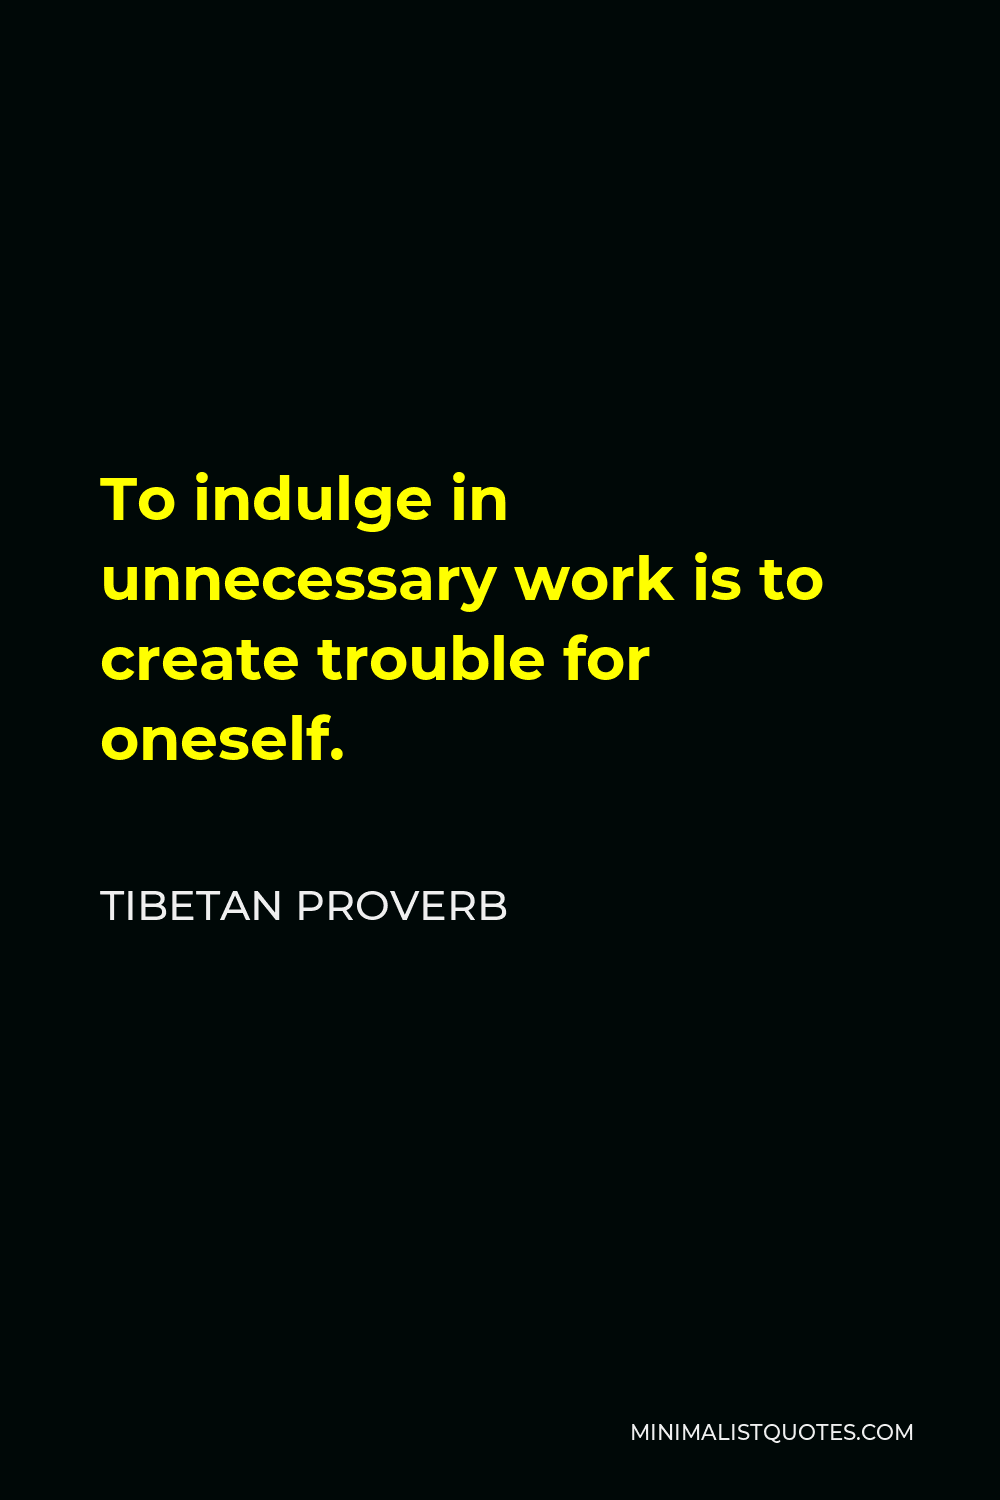 Tibetan Proverb Quote - To indulge in unnecessary work is to create trouble for oneself.